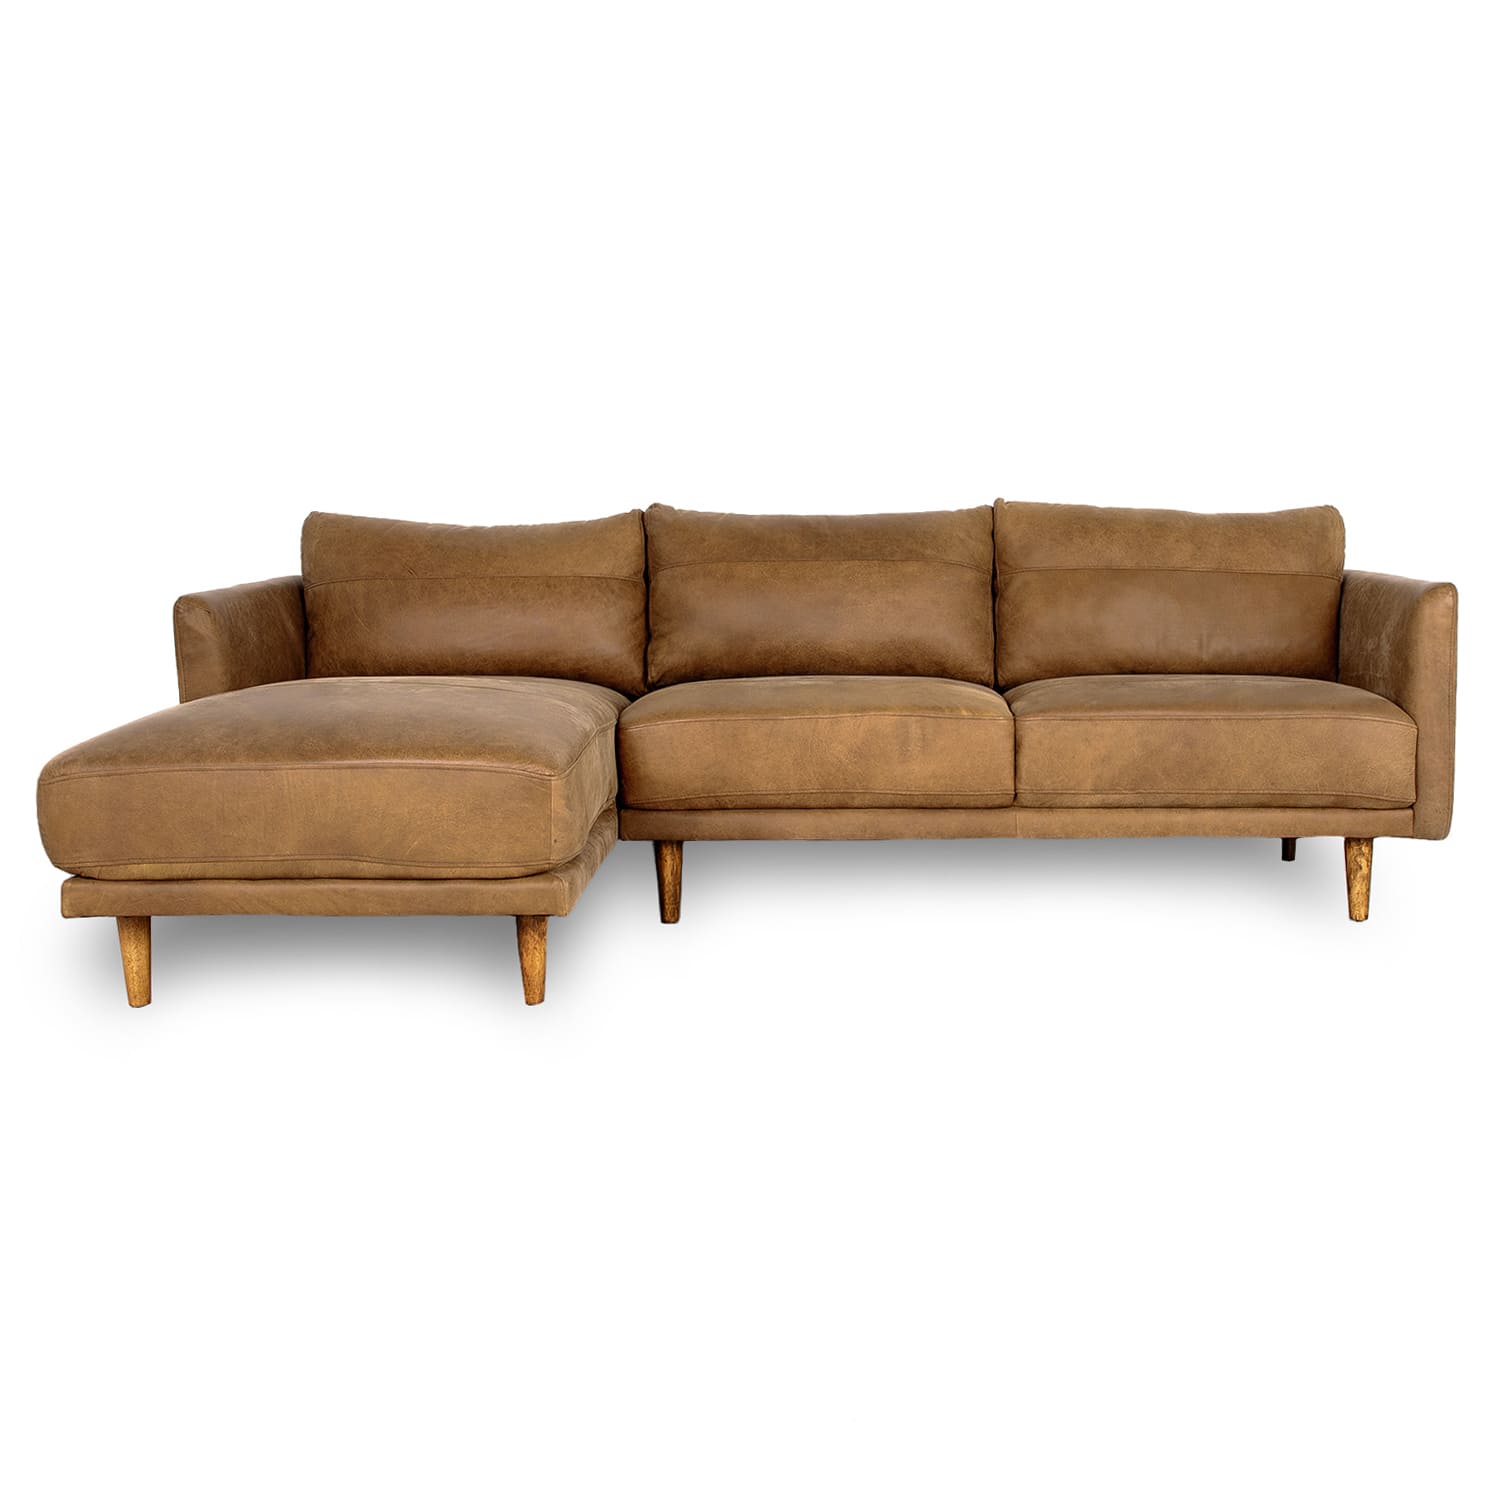 Jordie Leather Left Side Facing Sectional Chaise Lounge